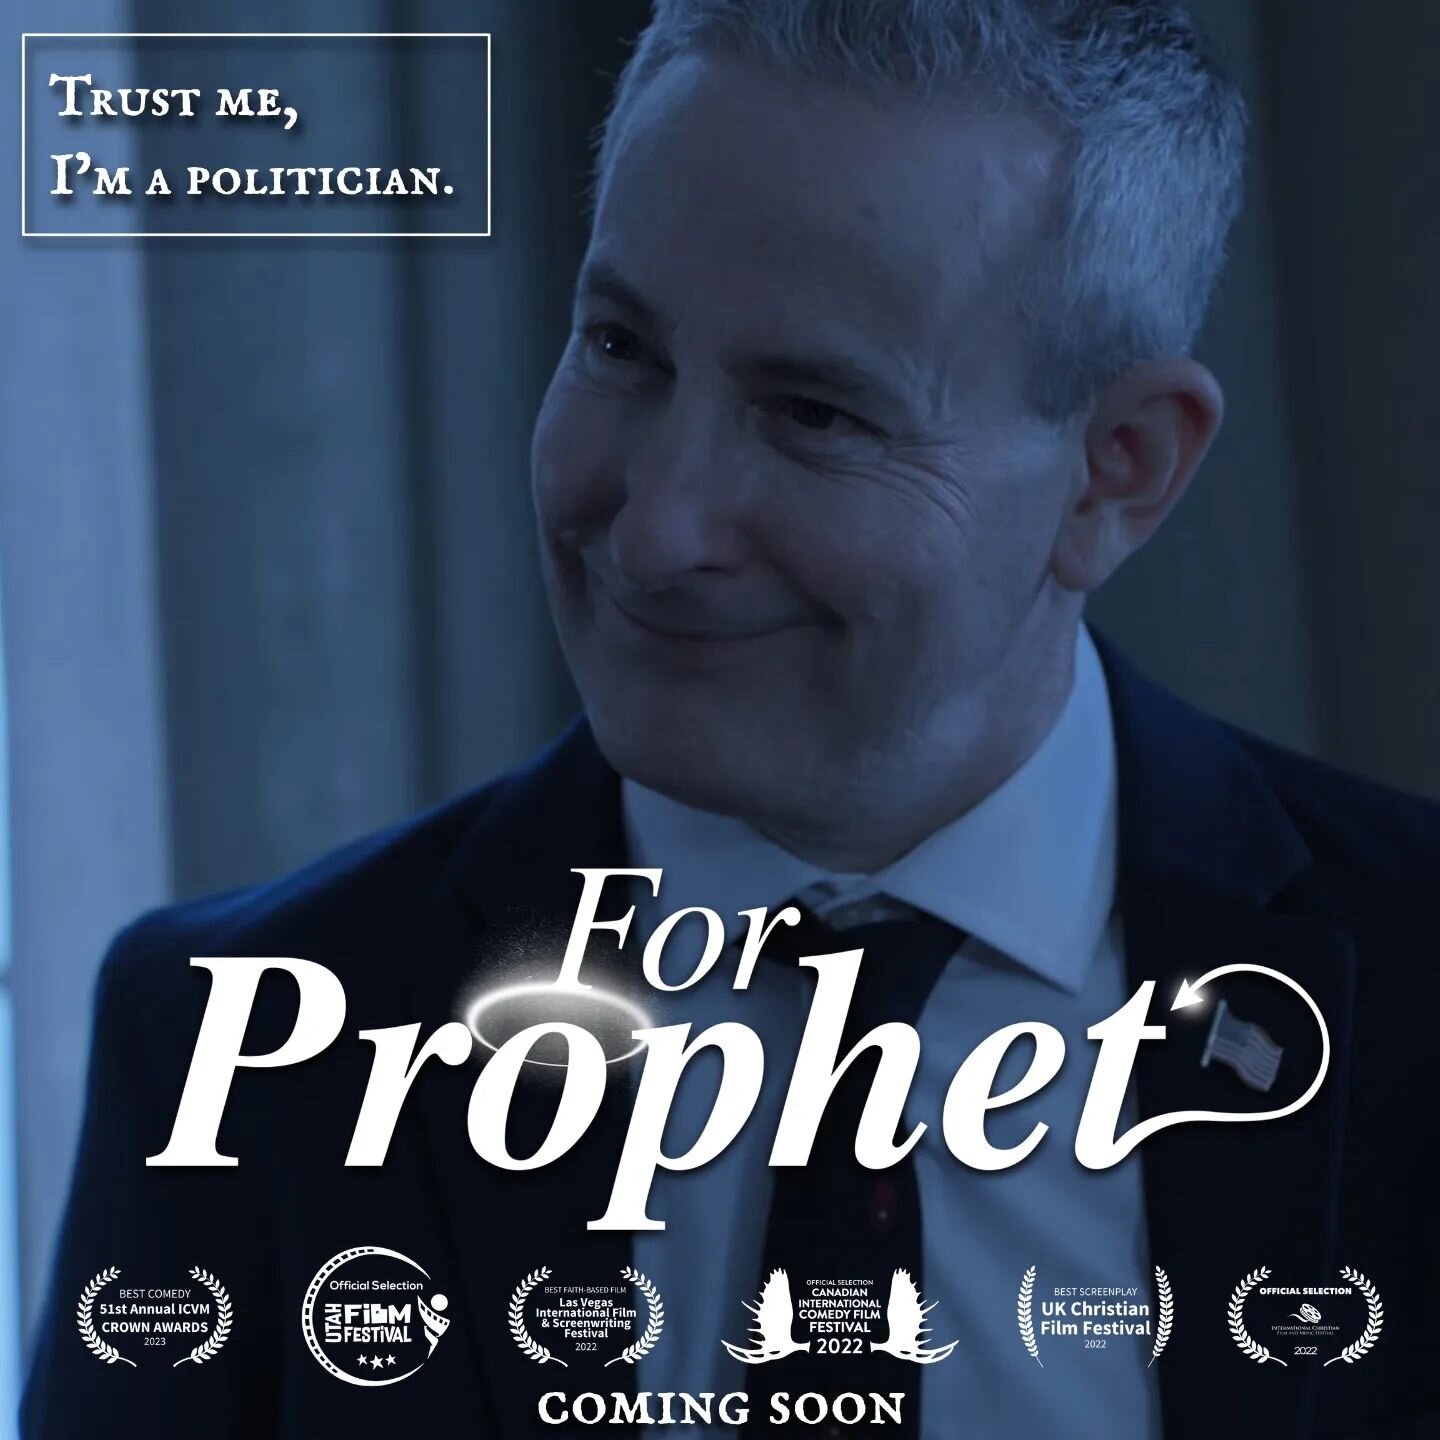 Trust him, he's a politician! 

&quot;Mayor Kevin Owens&quot; as portrayed by the incredible #EddieJemison (Ocean's Trilogy, Waitress) might be tangled up in the corruption at city hall.

Do you trust him? 😇😈🤞

#ComingSoon #ForProphet #ForProphetF